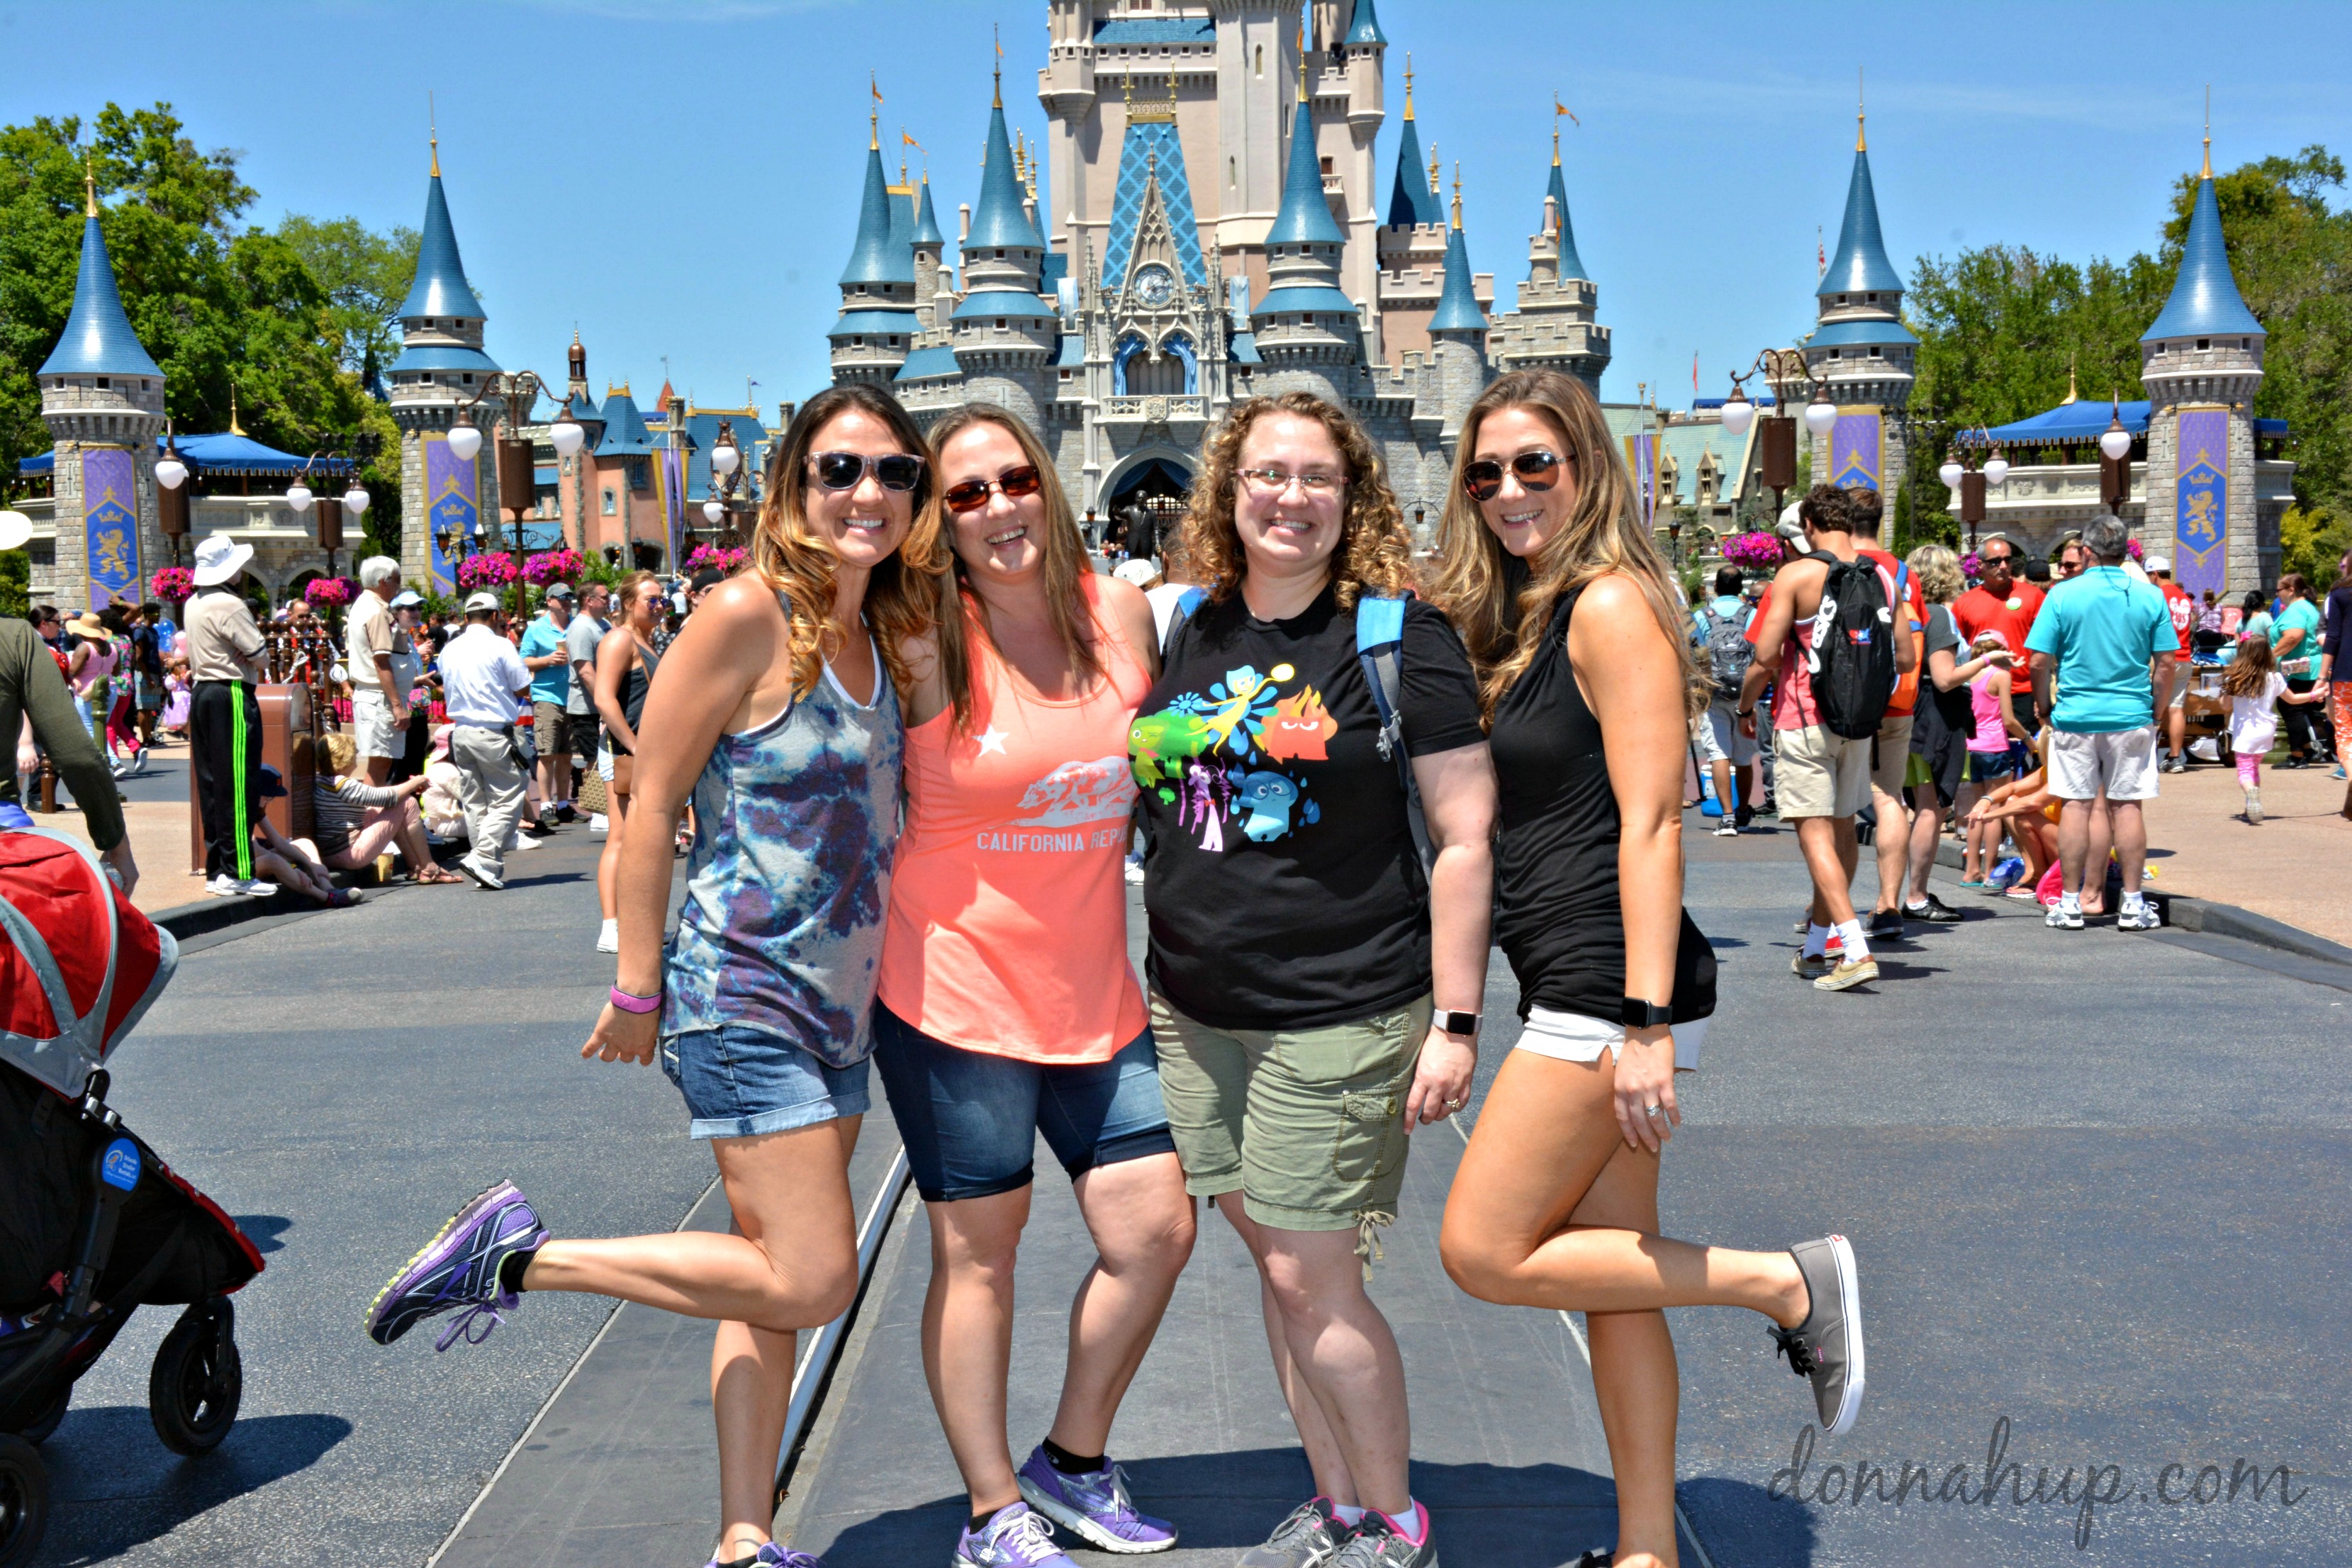 Three Must Haves for your Trip to Disney World